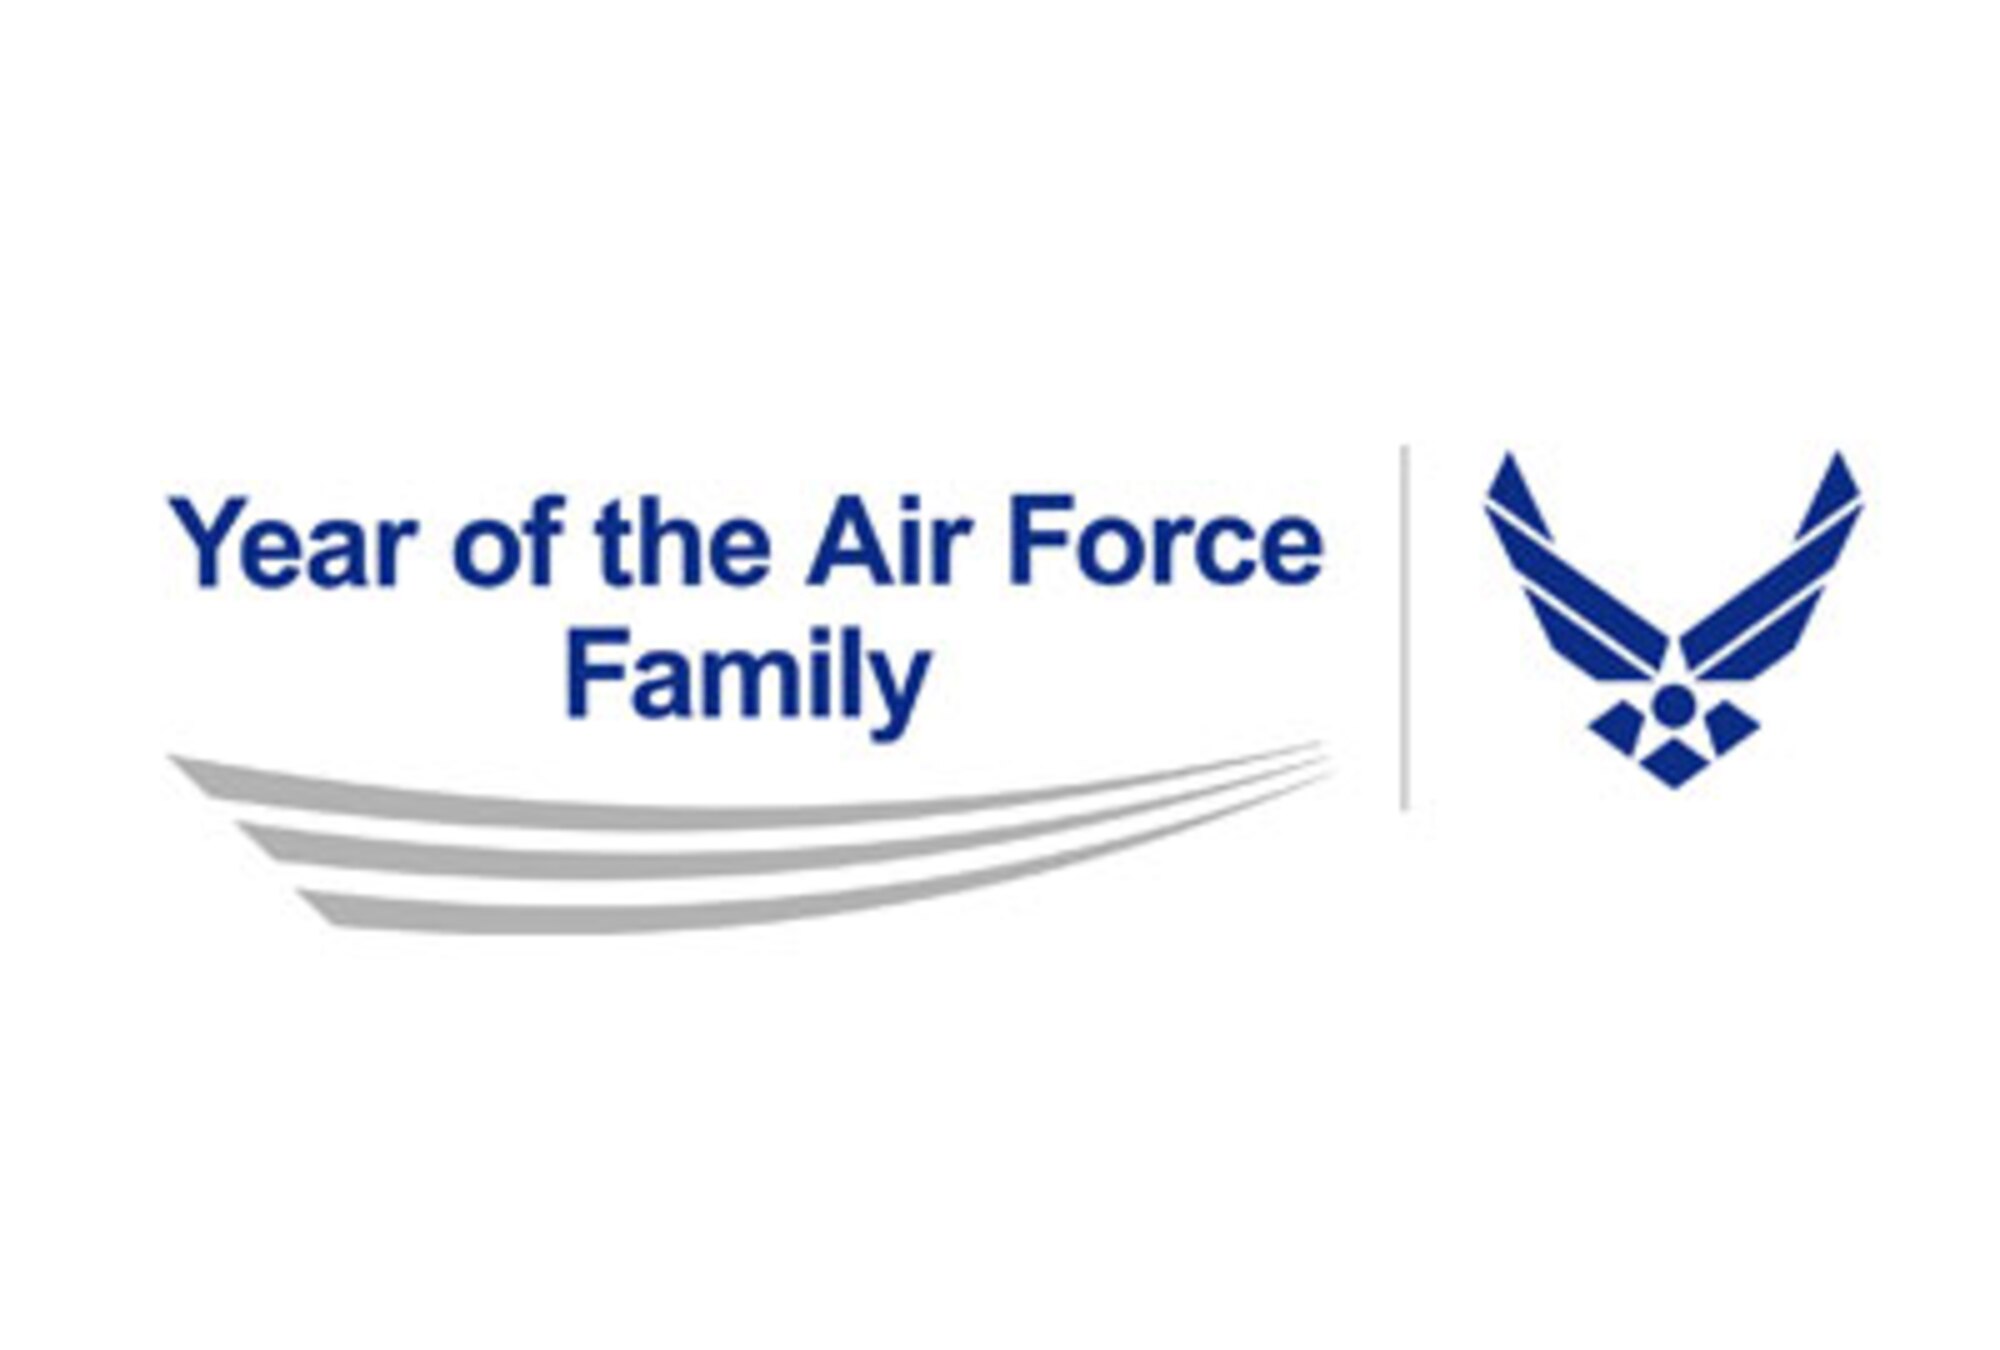 The Year of the Air Force Family